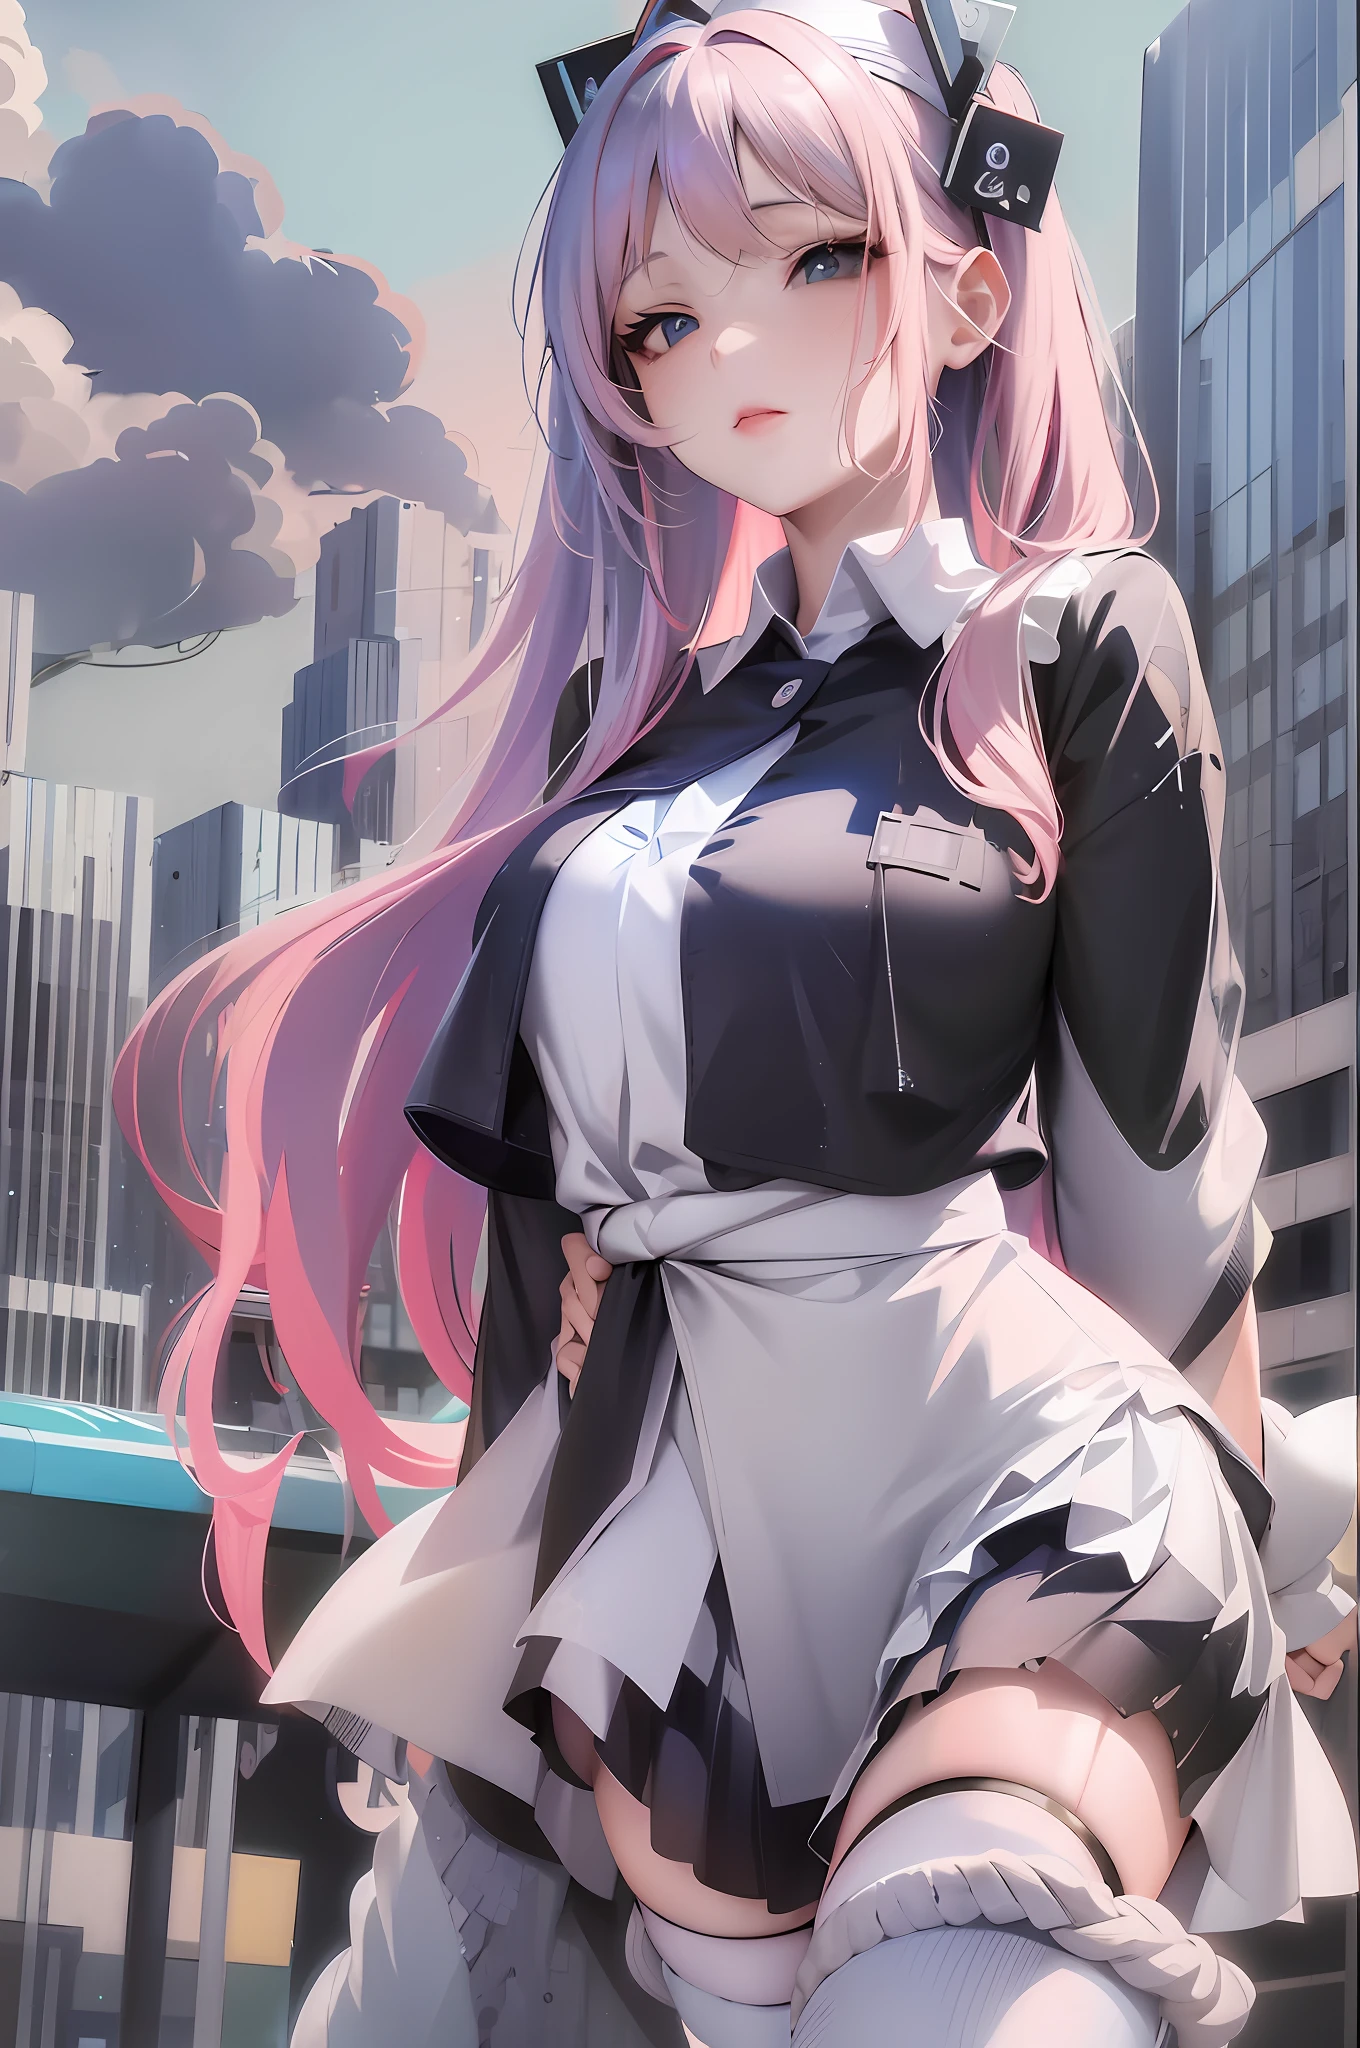 anime girl with pink hair and a black and white dress, artwork in the style of guweiz, smooth anime cg art, best anime 4k konachan wallpaper, cute anime waifu in a nice dress, anime art wallpaper 8 k, guweiz on pixiv artstation, guweiz on artstation pixiv, anime style 4 k